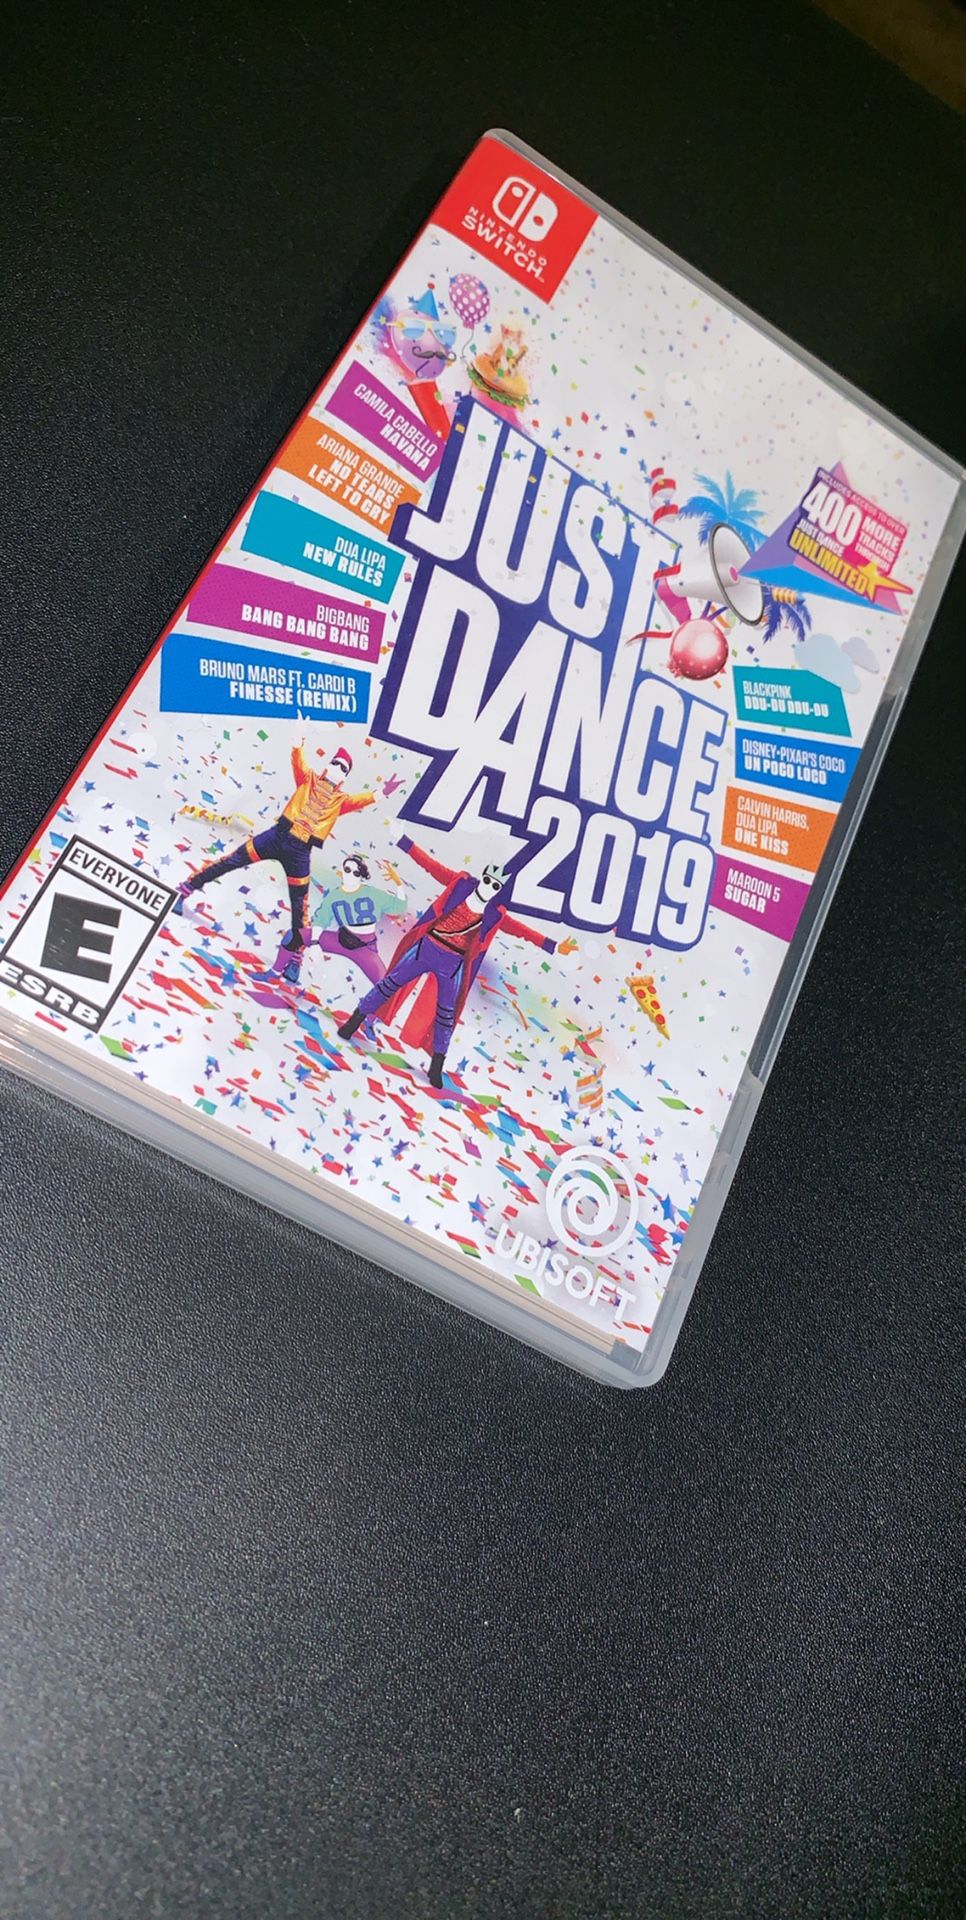 Just Dance Nintendo Switch game